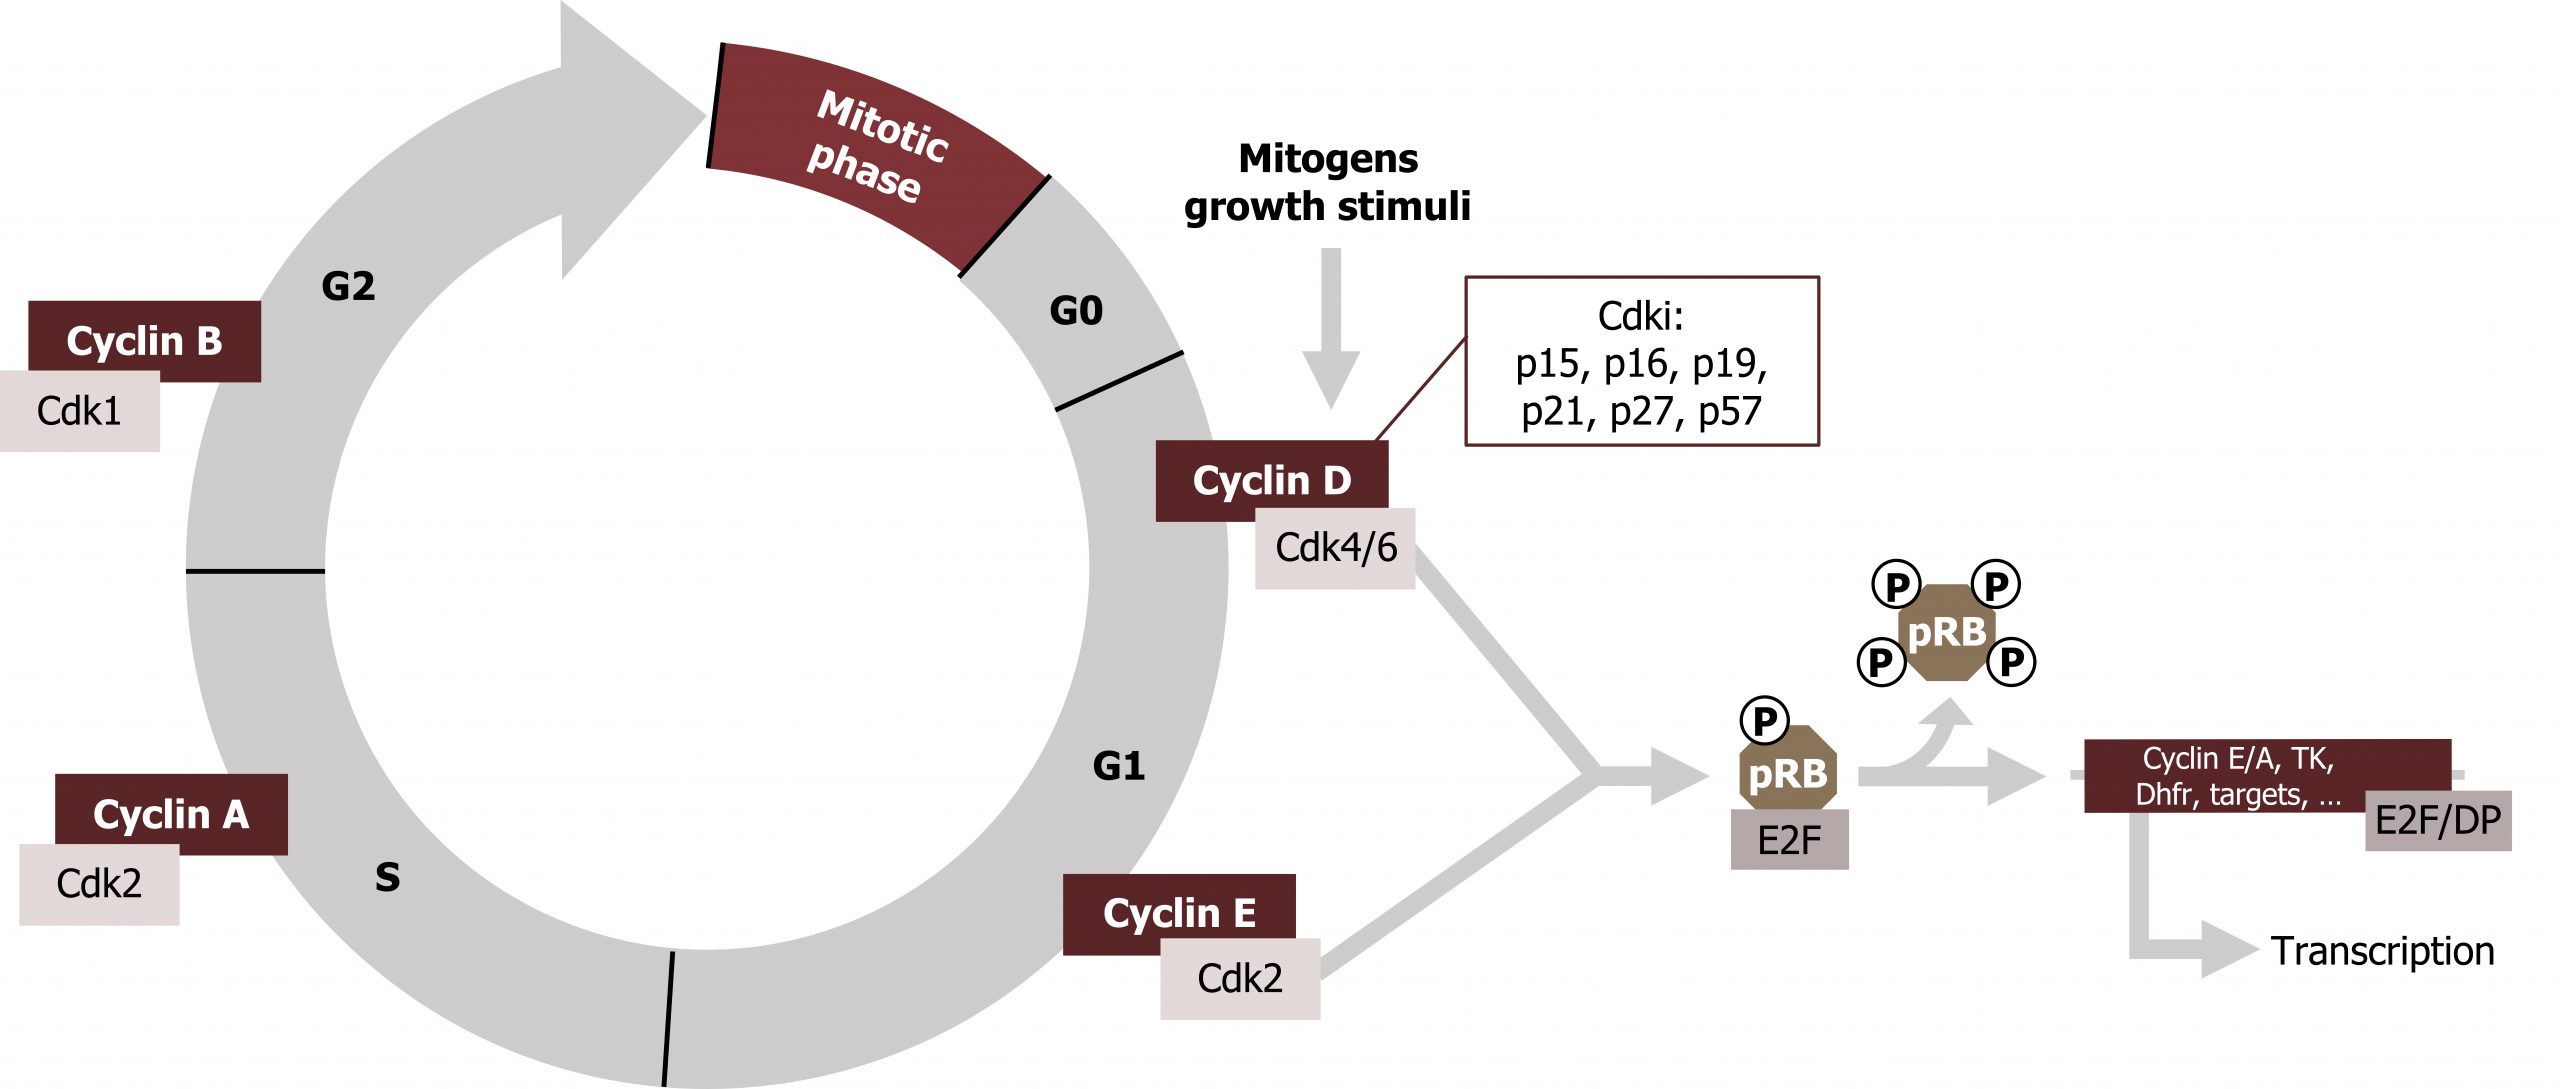 Circular diagram beginning with mitotic phase, G0, G1 with bound Cyclin D-Cdk4/6 and Cyclin E-Cdk2, S with bound Cyclin A-Cdk2, G2 with bound Cyclin B-Cdk1. Cyclin D labeled mitogens growth stimuli with text box Cdki: p15, p16, p19, p21, p27, p57. Cyclin D and Cyclin E arrow E2F with bound phosphorylated pRB arrow with phosphorylated pRB leaving to text box Cyclin E/A, TK, Dhfr, targets,... bound with E2F/DP arrow to transcription.